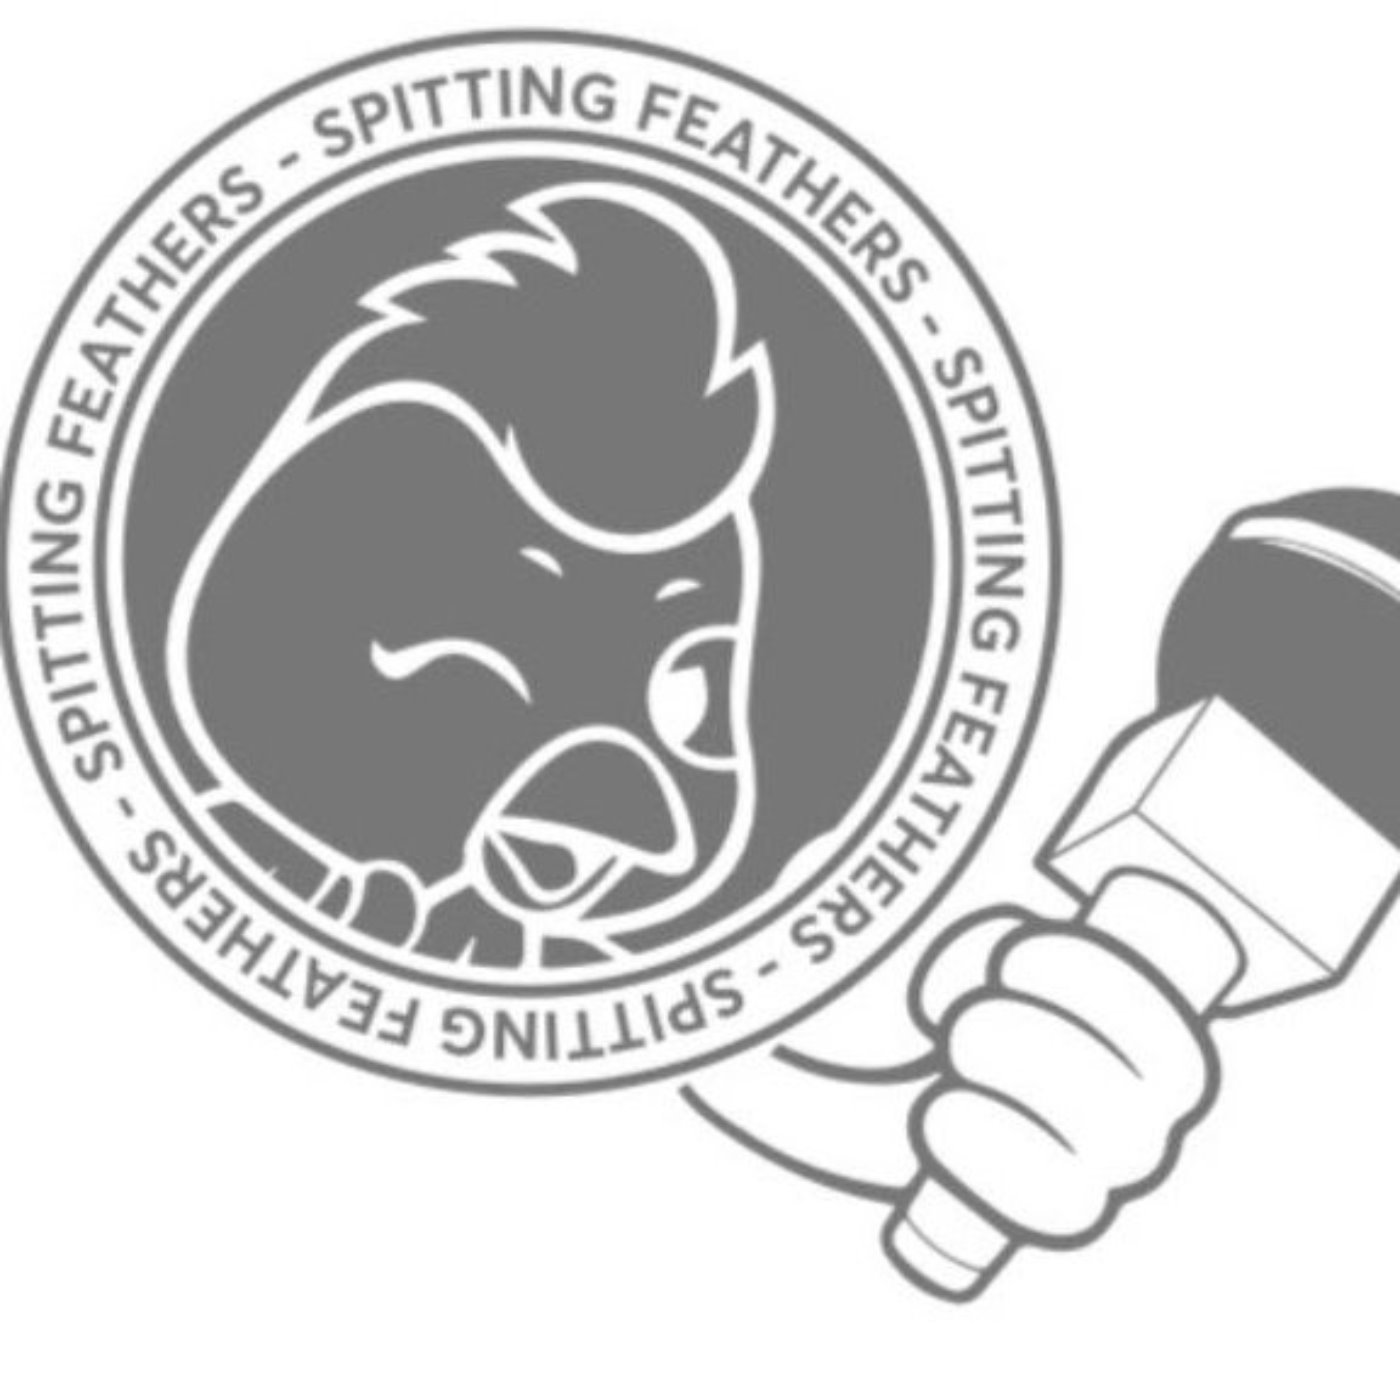 SPITTING FEATHERS PODCAST